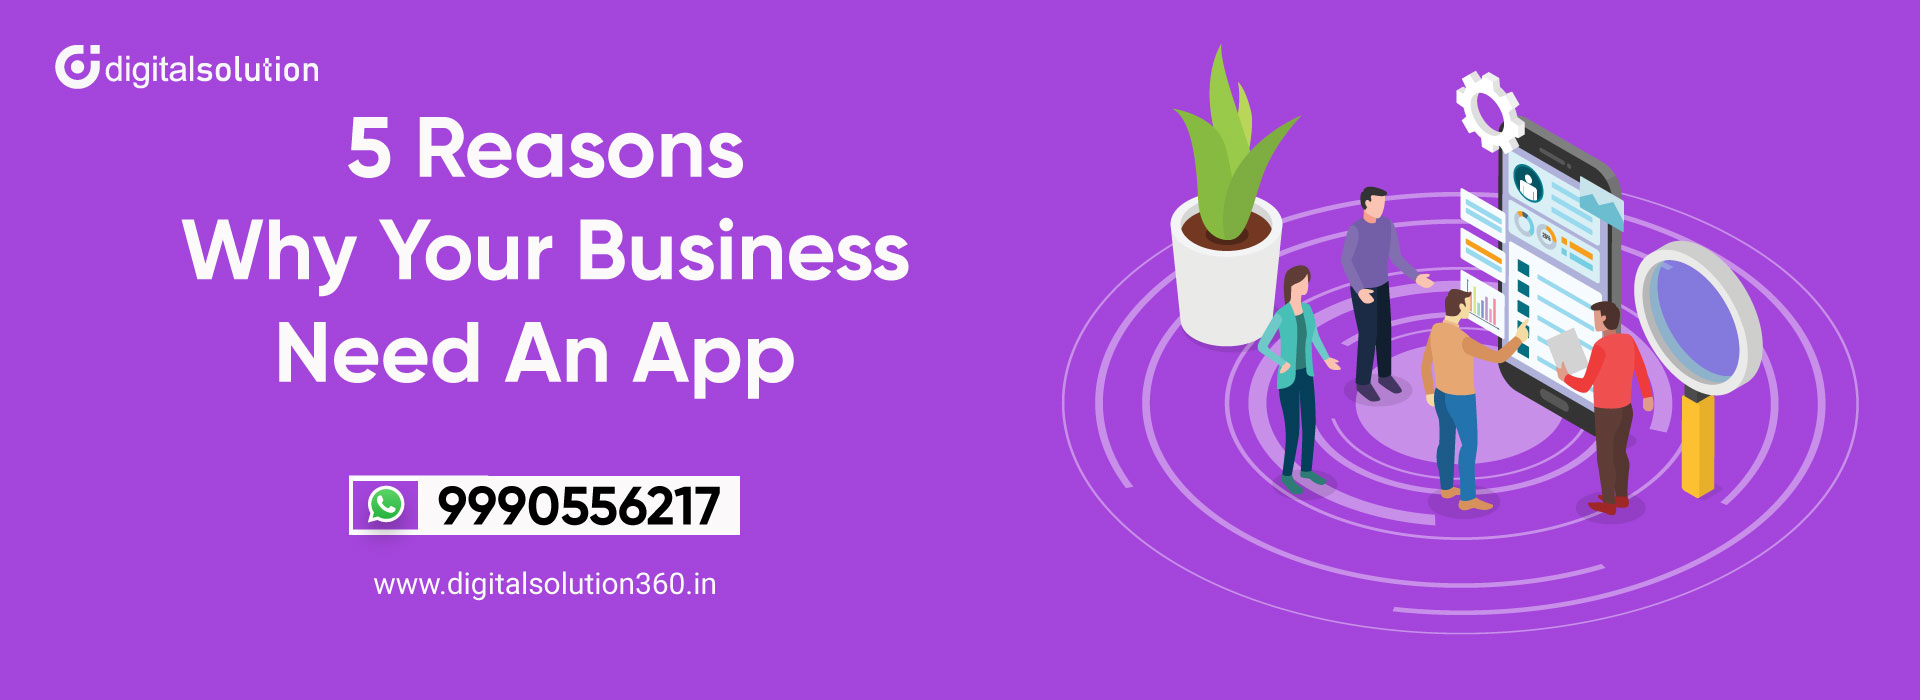 why-you-need-an-app-for-your-business-5-reasons